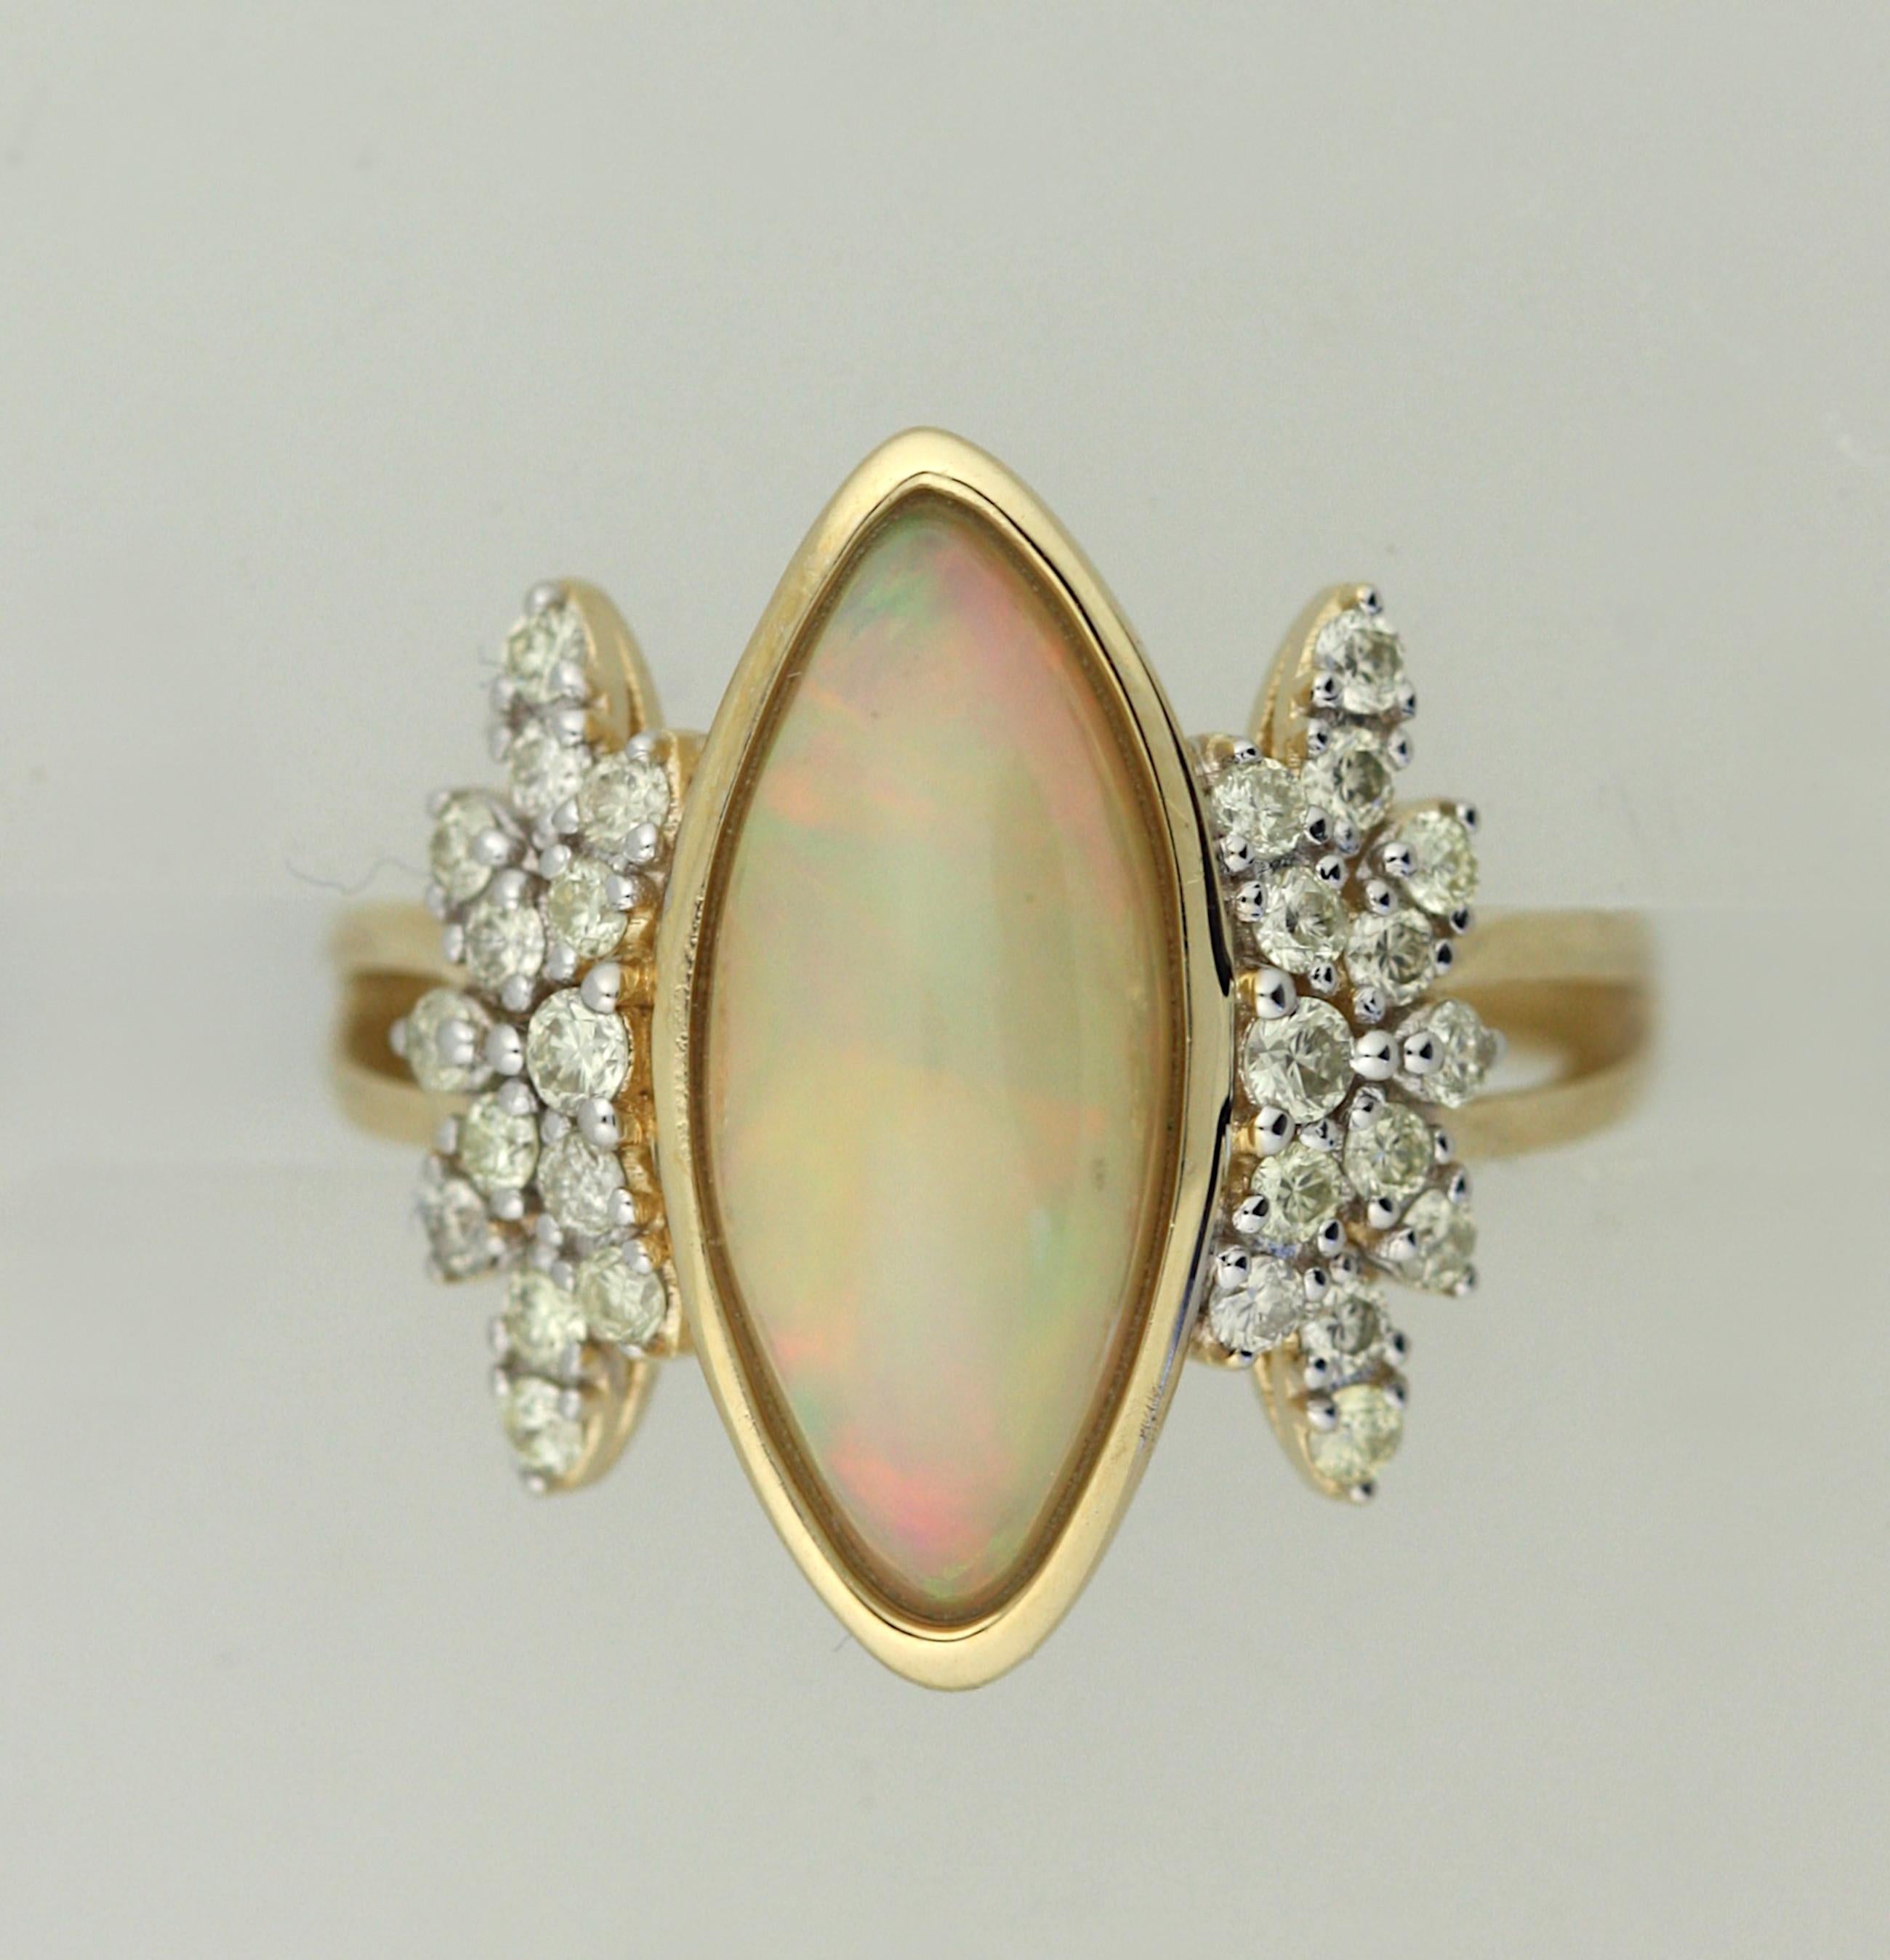 Women's or Men's Yellow Gold Diamond and Opal Ring